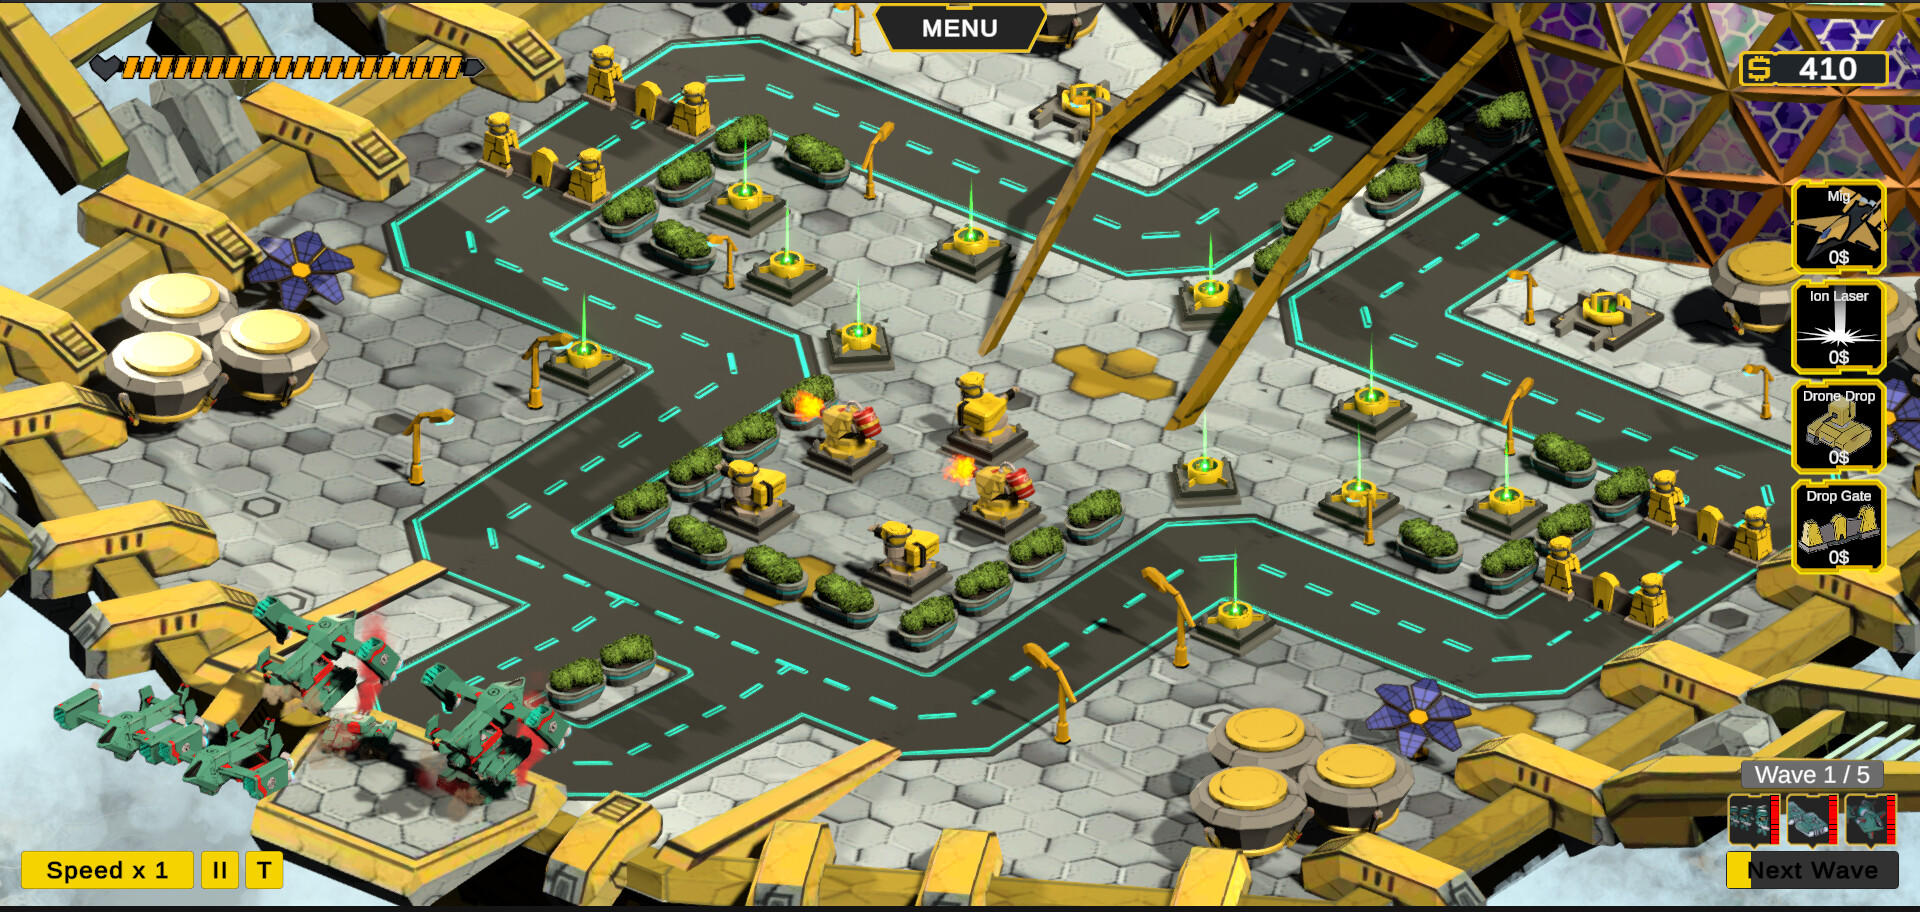 Screenshot 1 of Neocon Tower Defence 3 